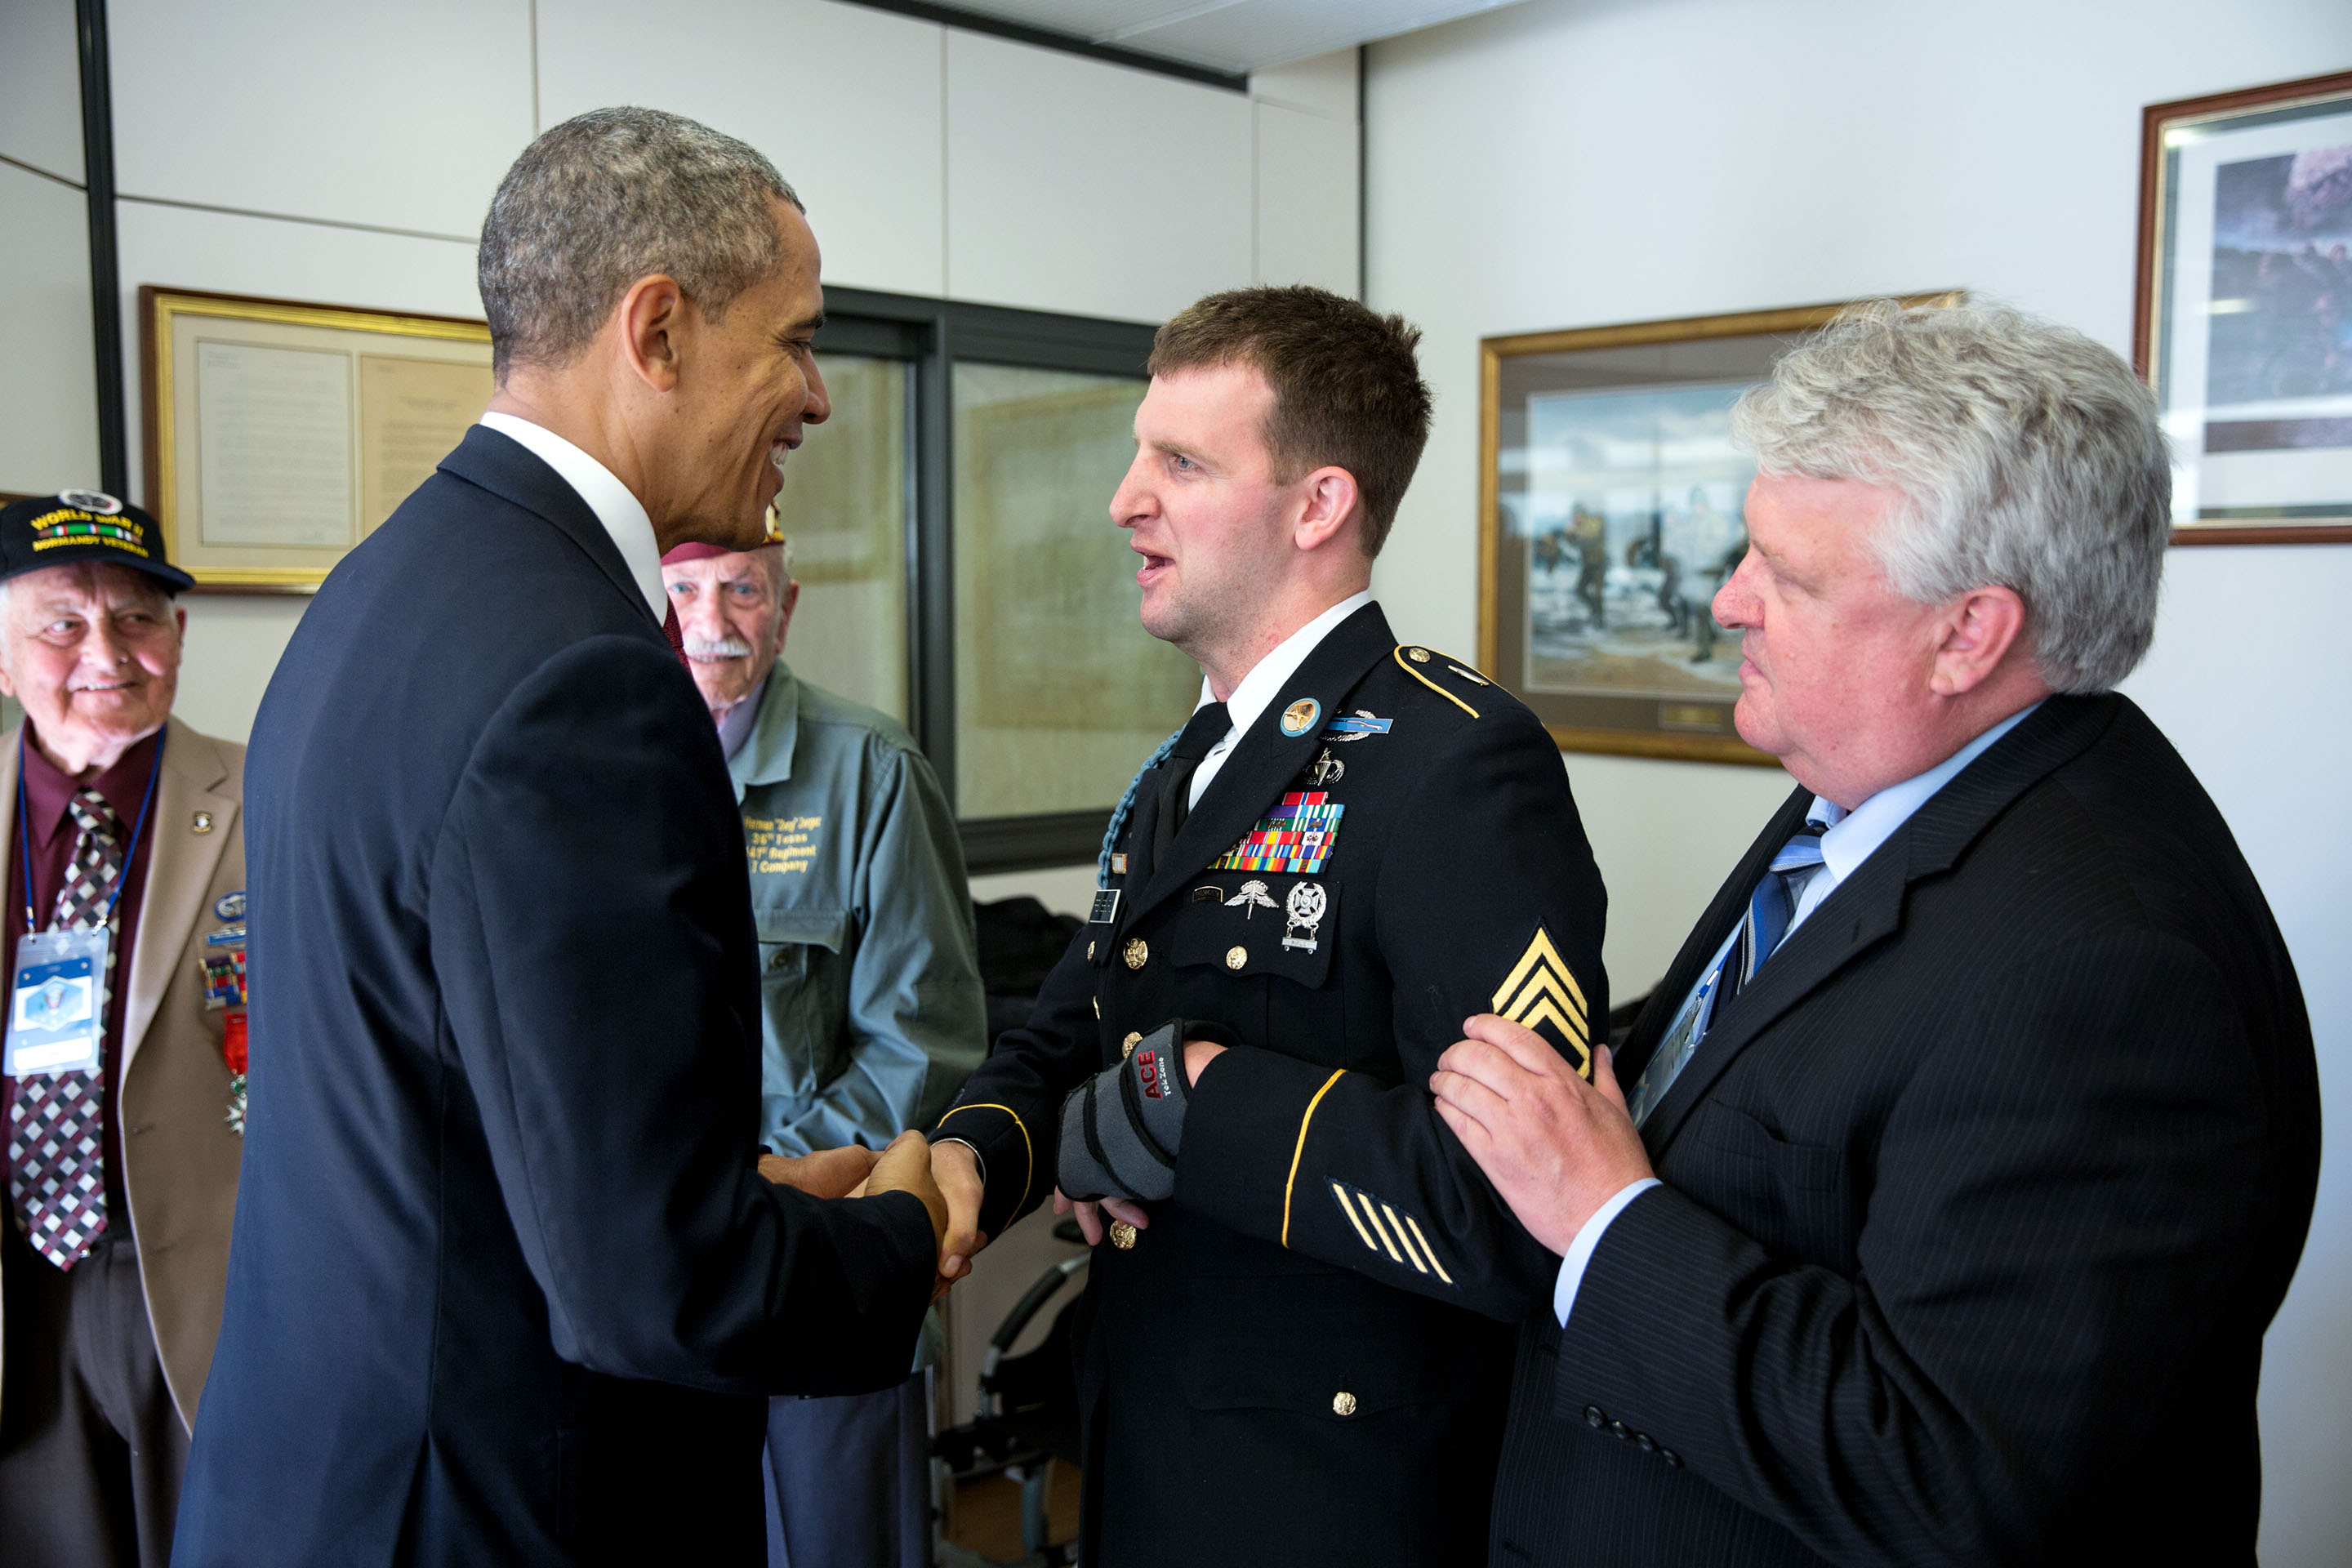 June 6, 2014: The President greets Cory and his father Craig and U.S. WWII veterans prior to the 70th anniversary of D-Day in Normandy. (Official White House Photo by Pete Souza)